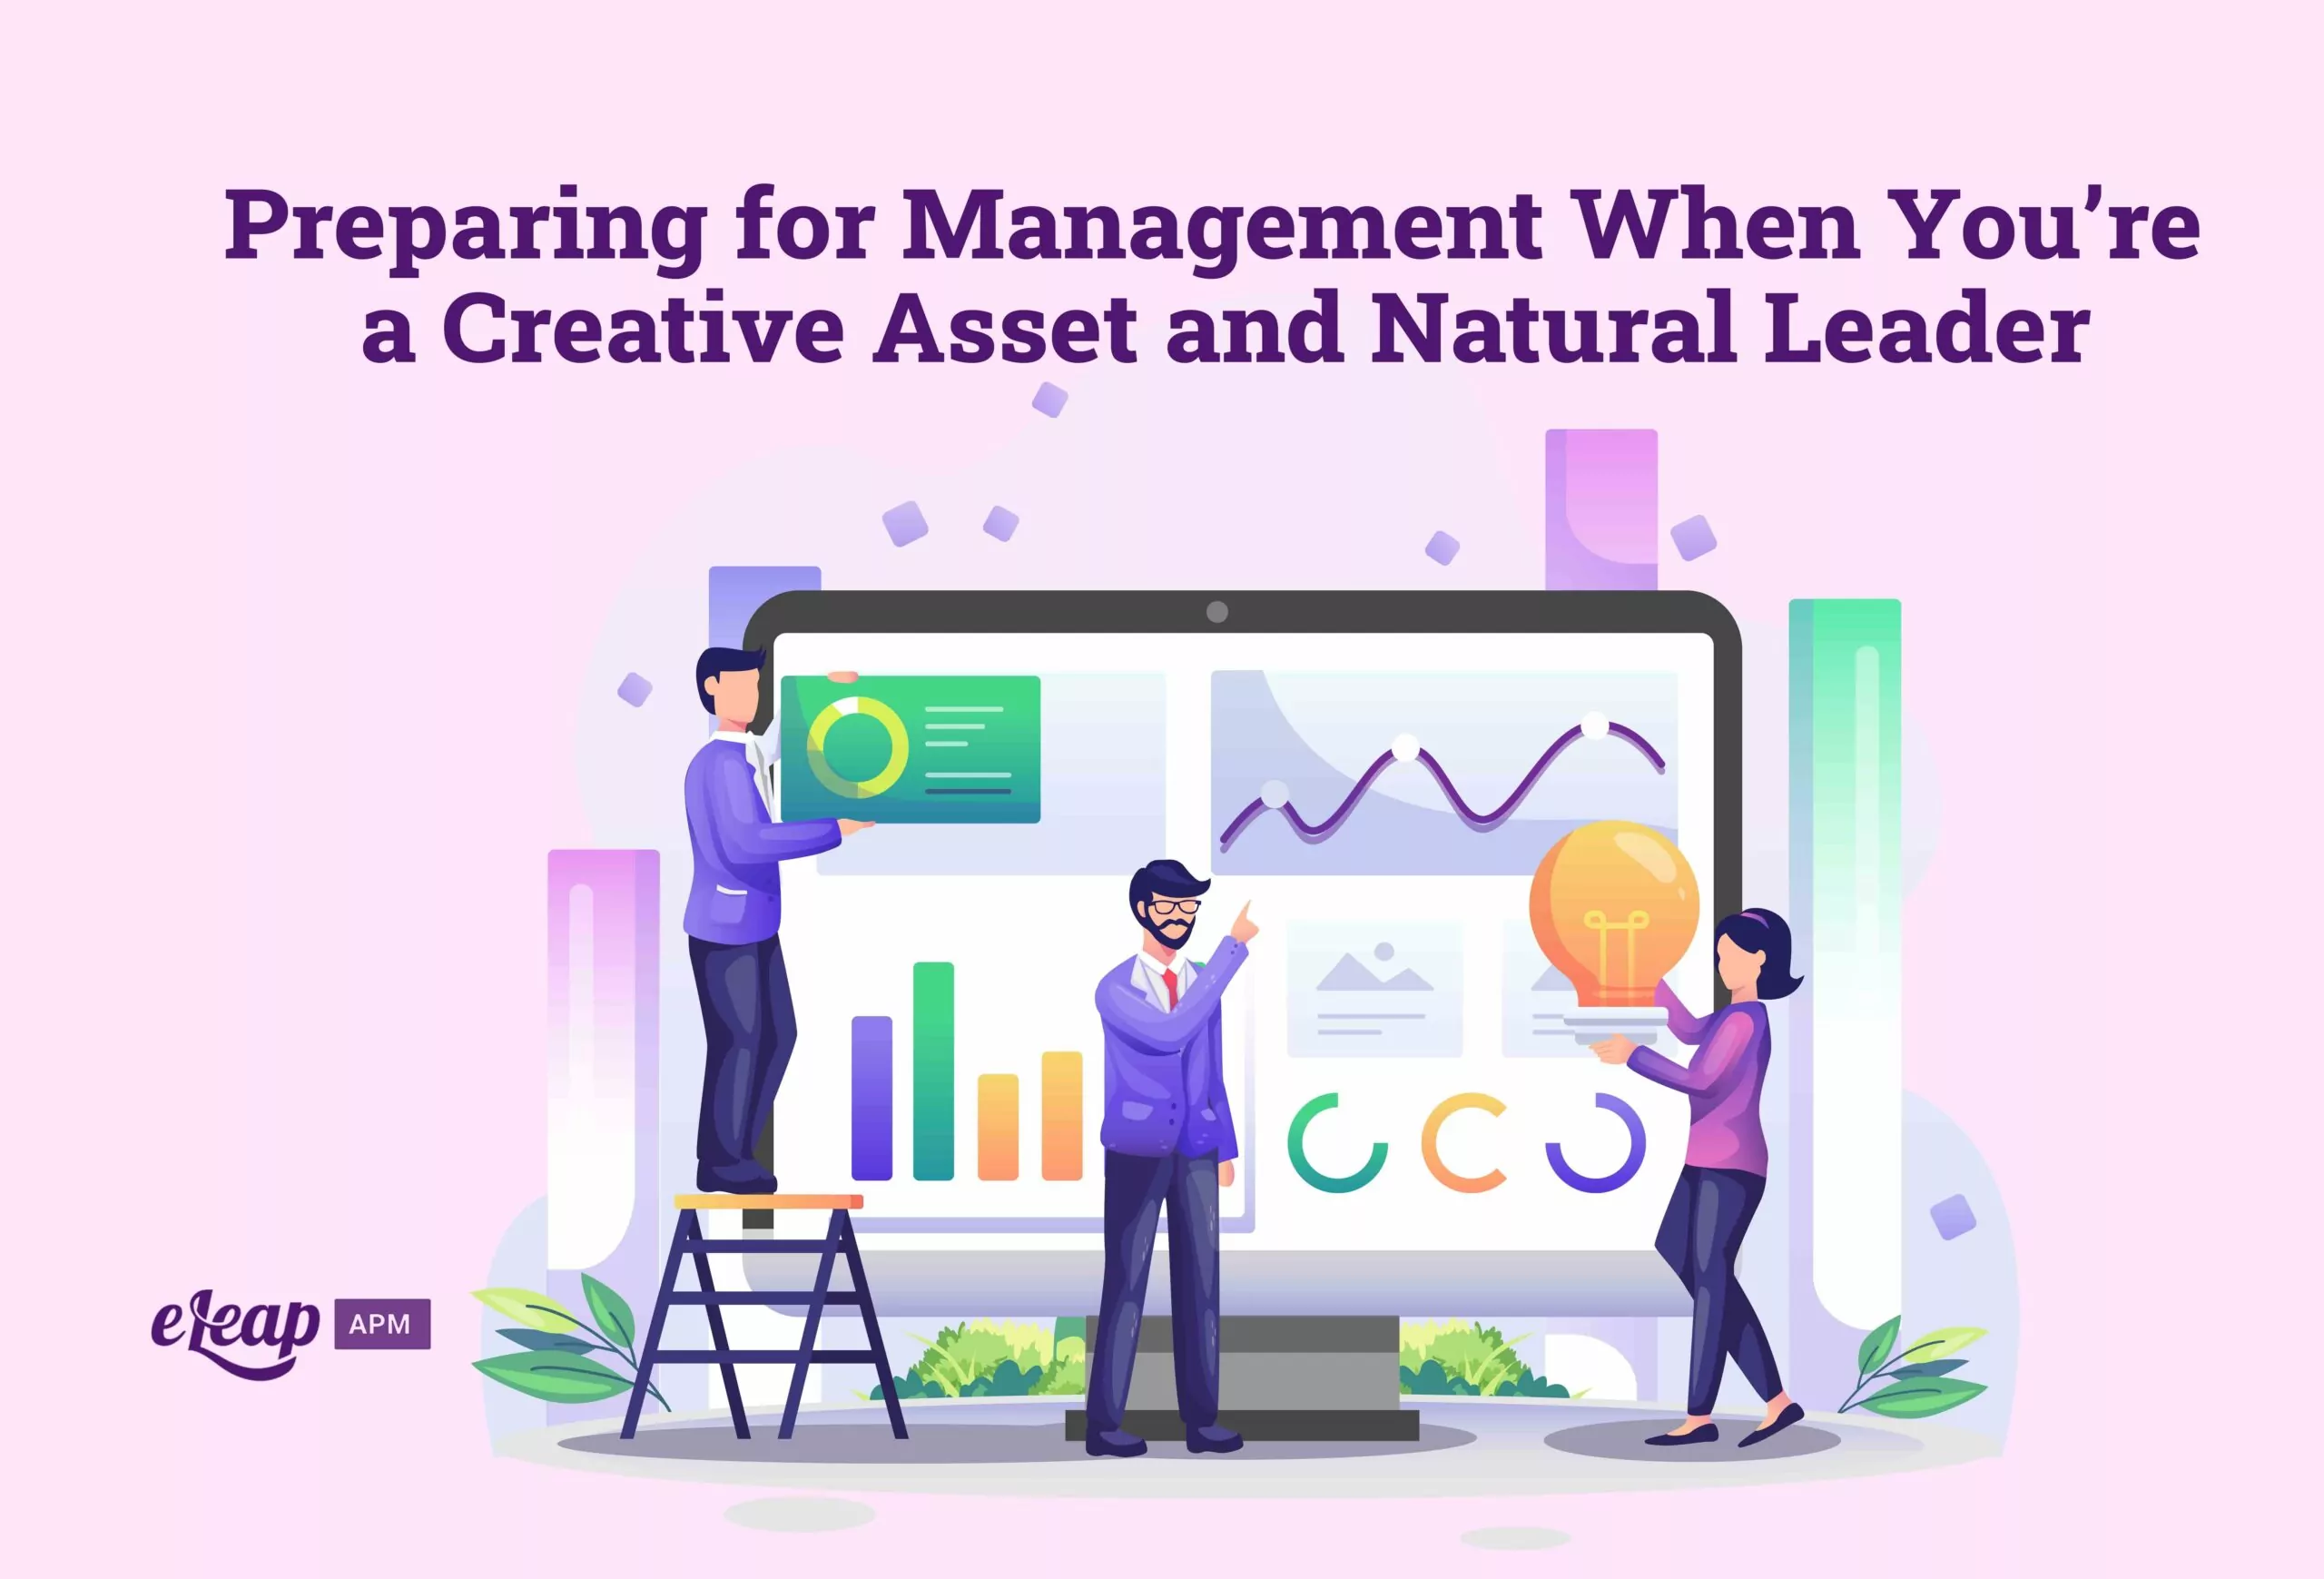 Preparing for Management When You’re a Creative Asset and Natural Leader